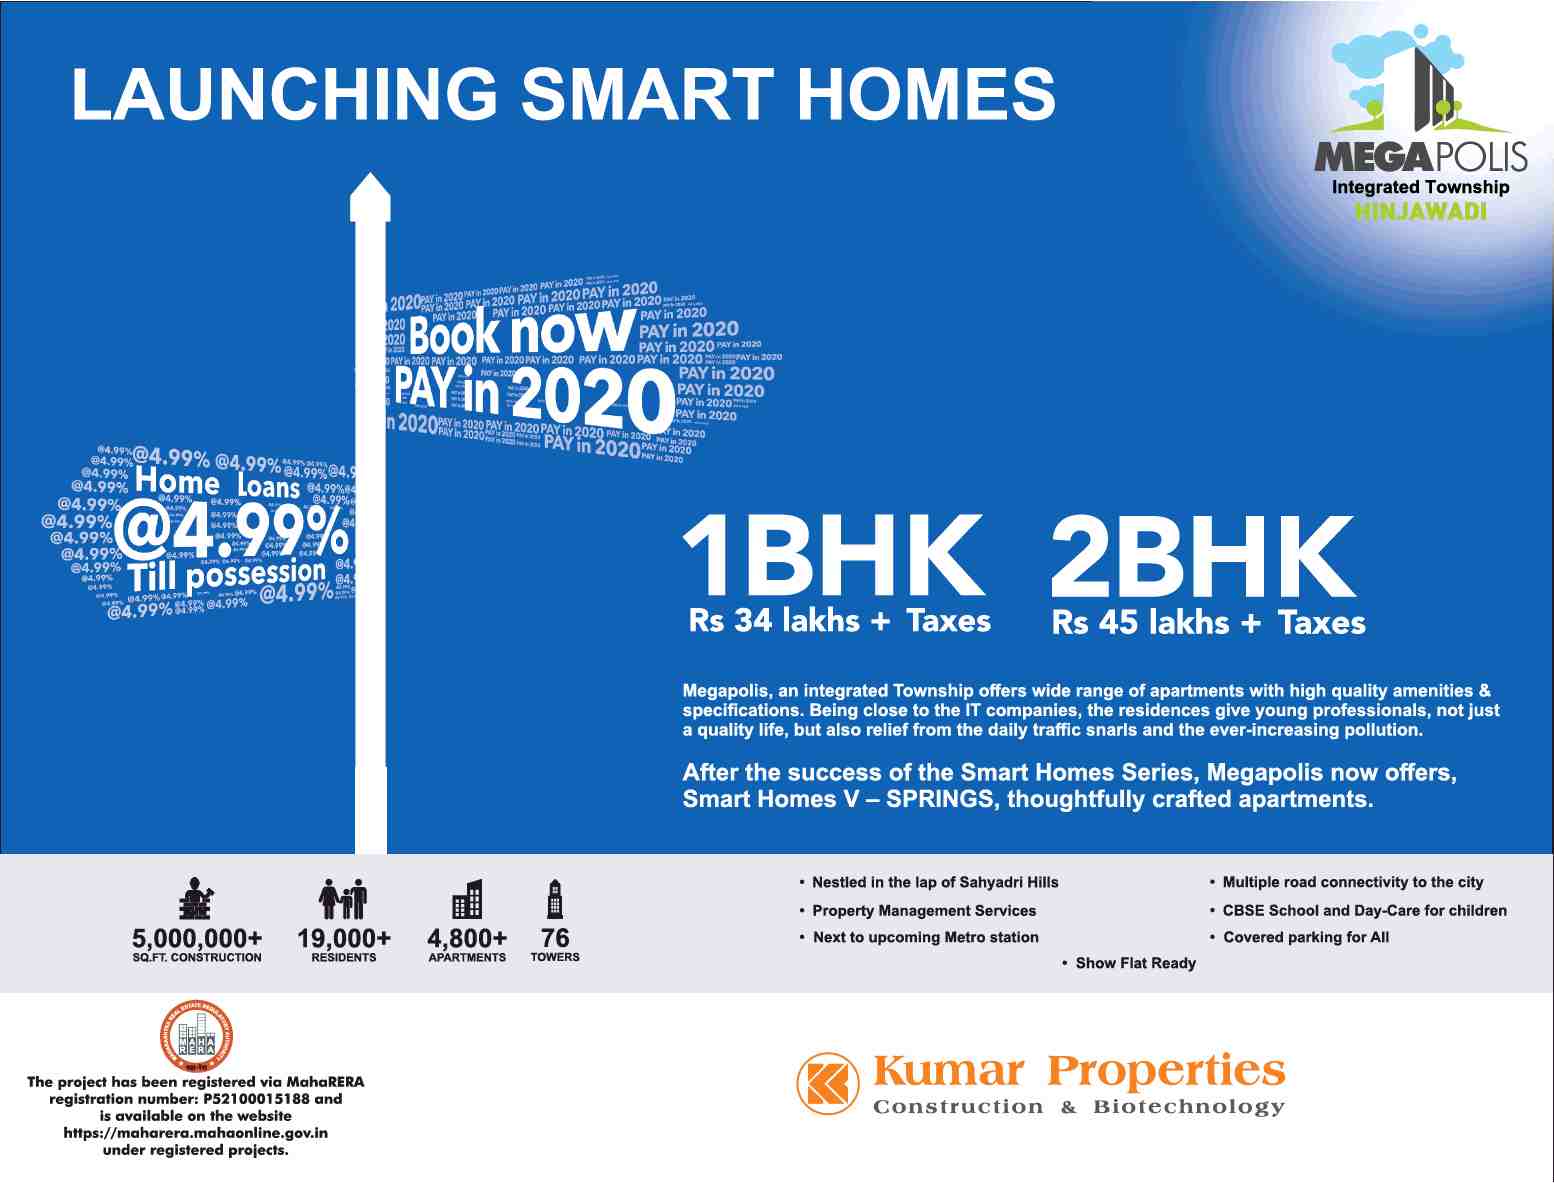 Book with home loans @ 4.99% till possession at Kumar Megapolis in Pune